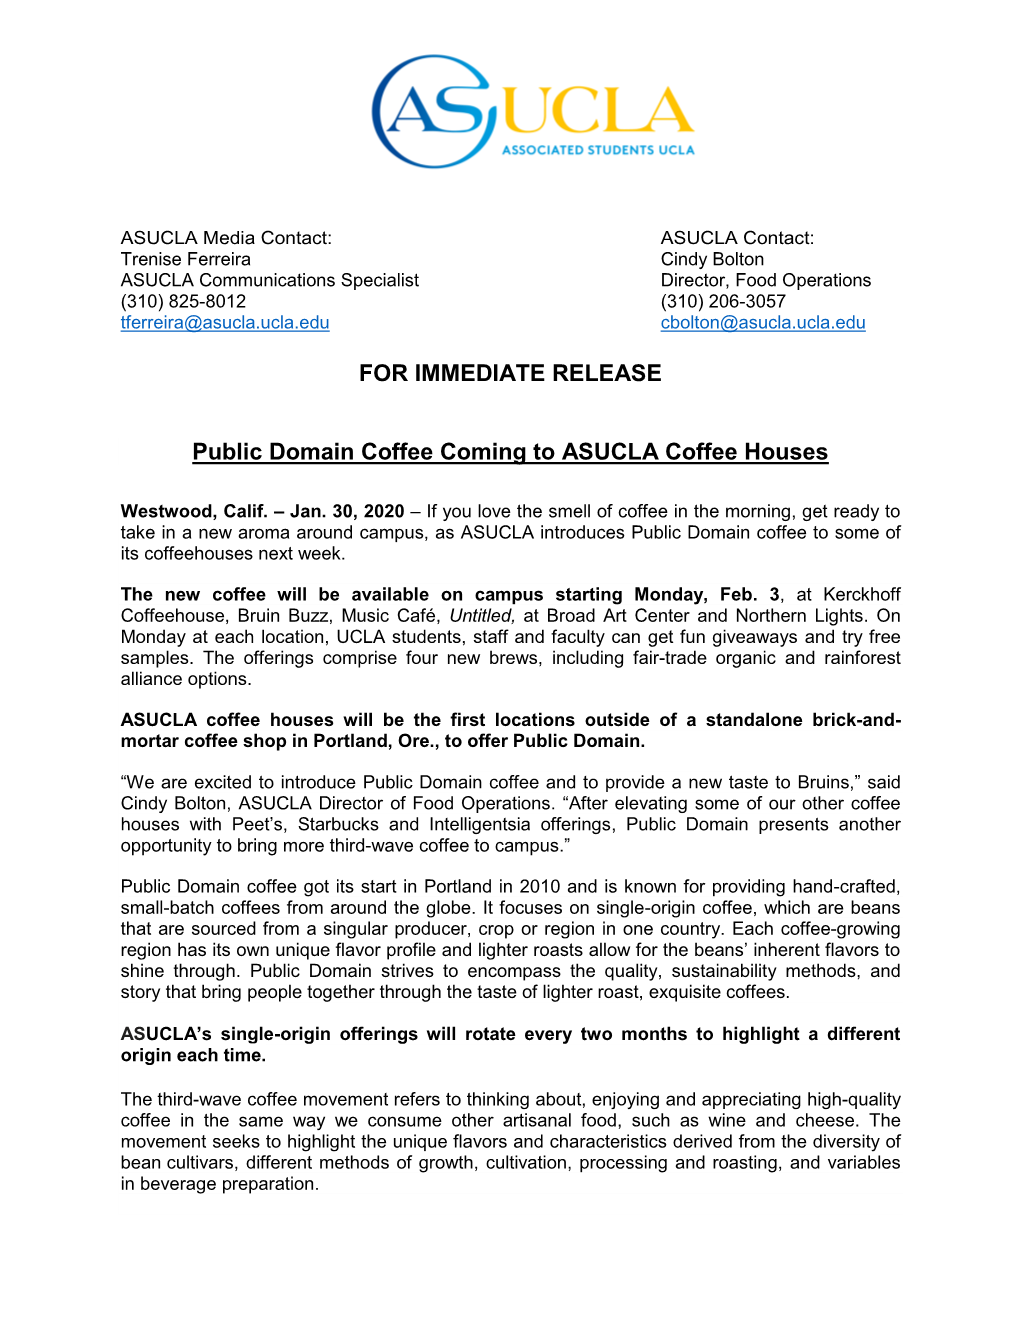 FOR IMMEDIATE RELEASE Public Domain Coffee Coming to ASUCLA